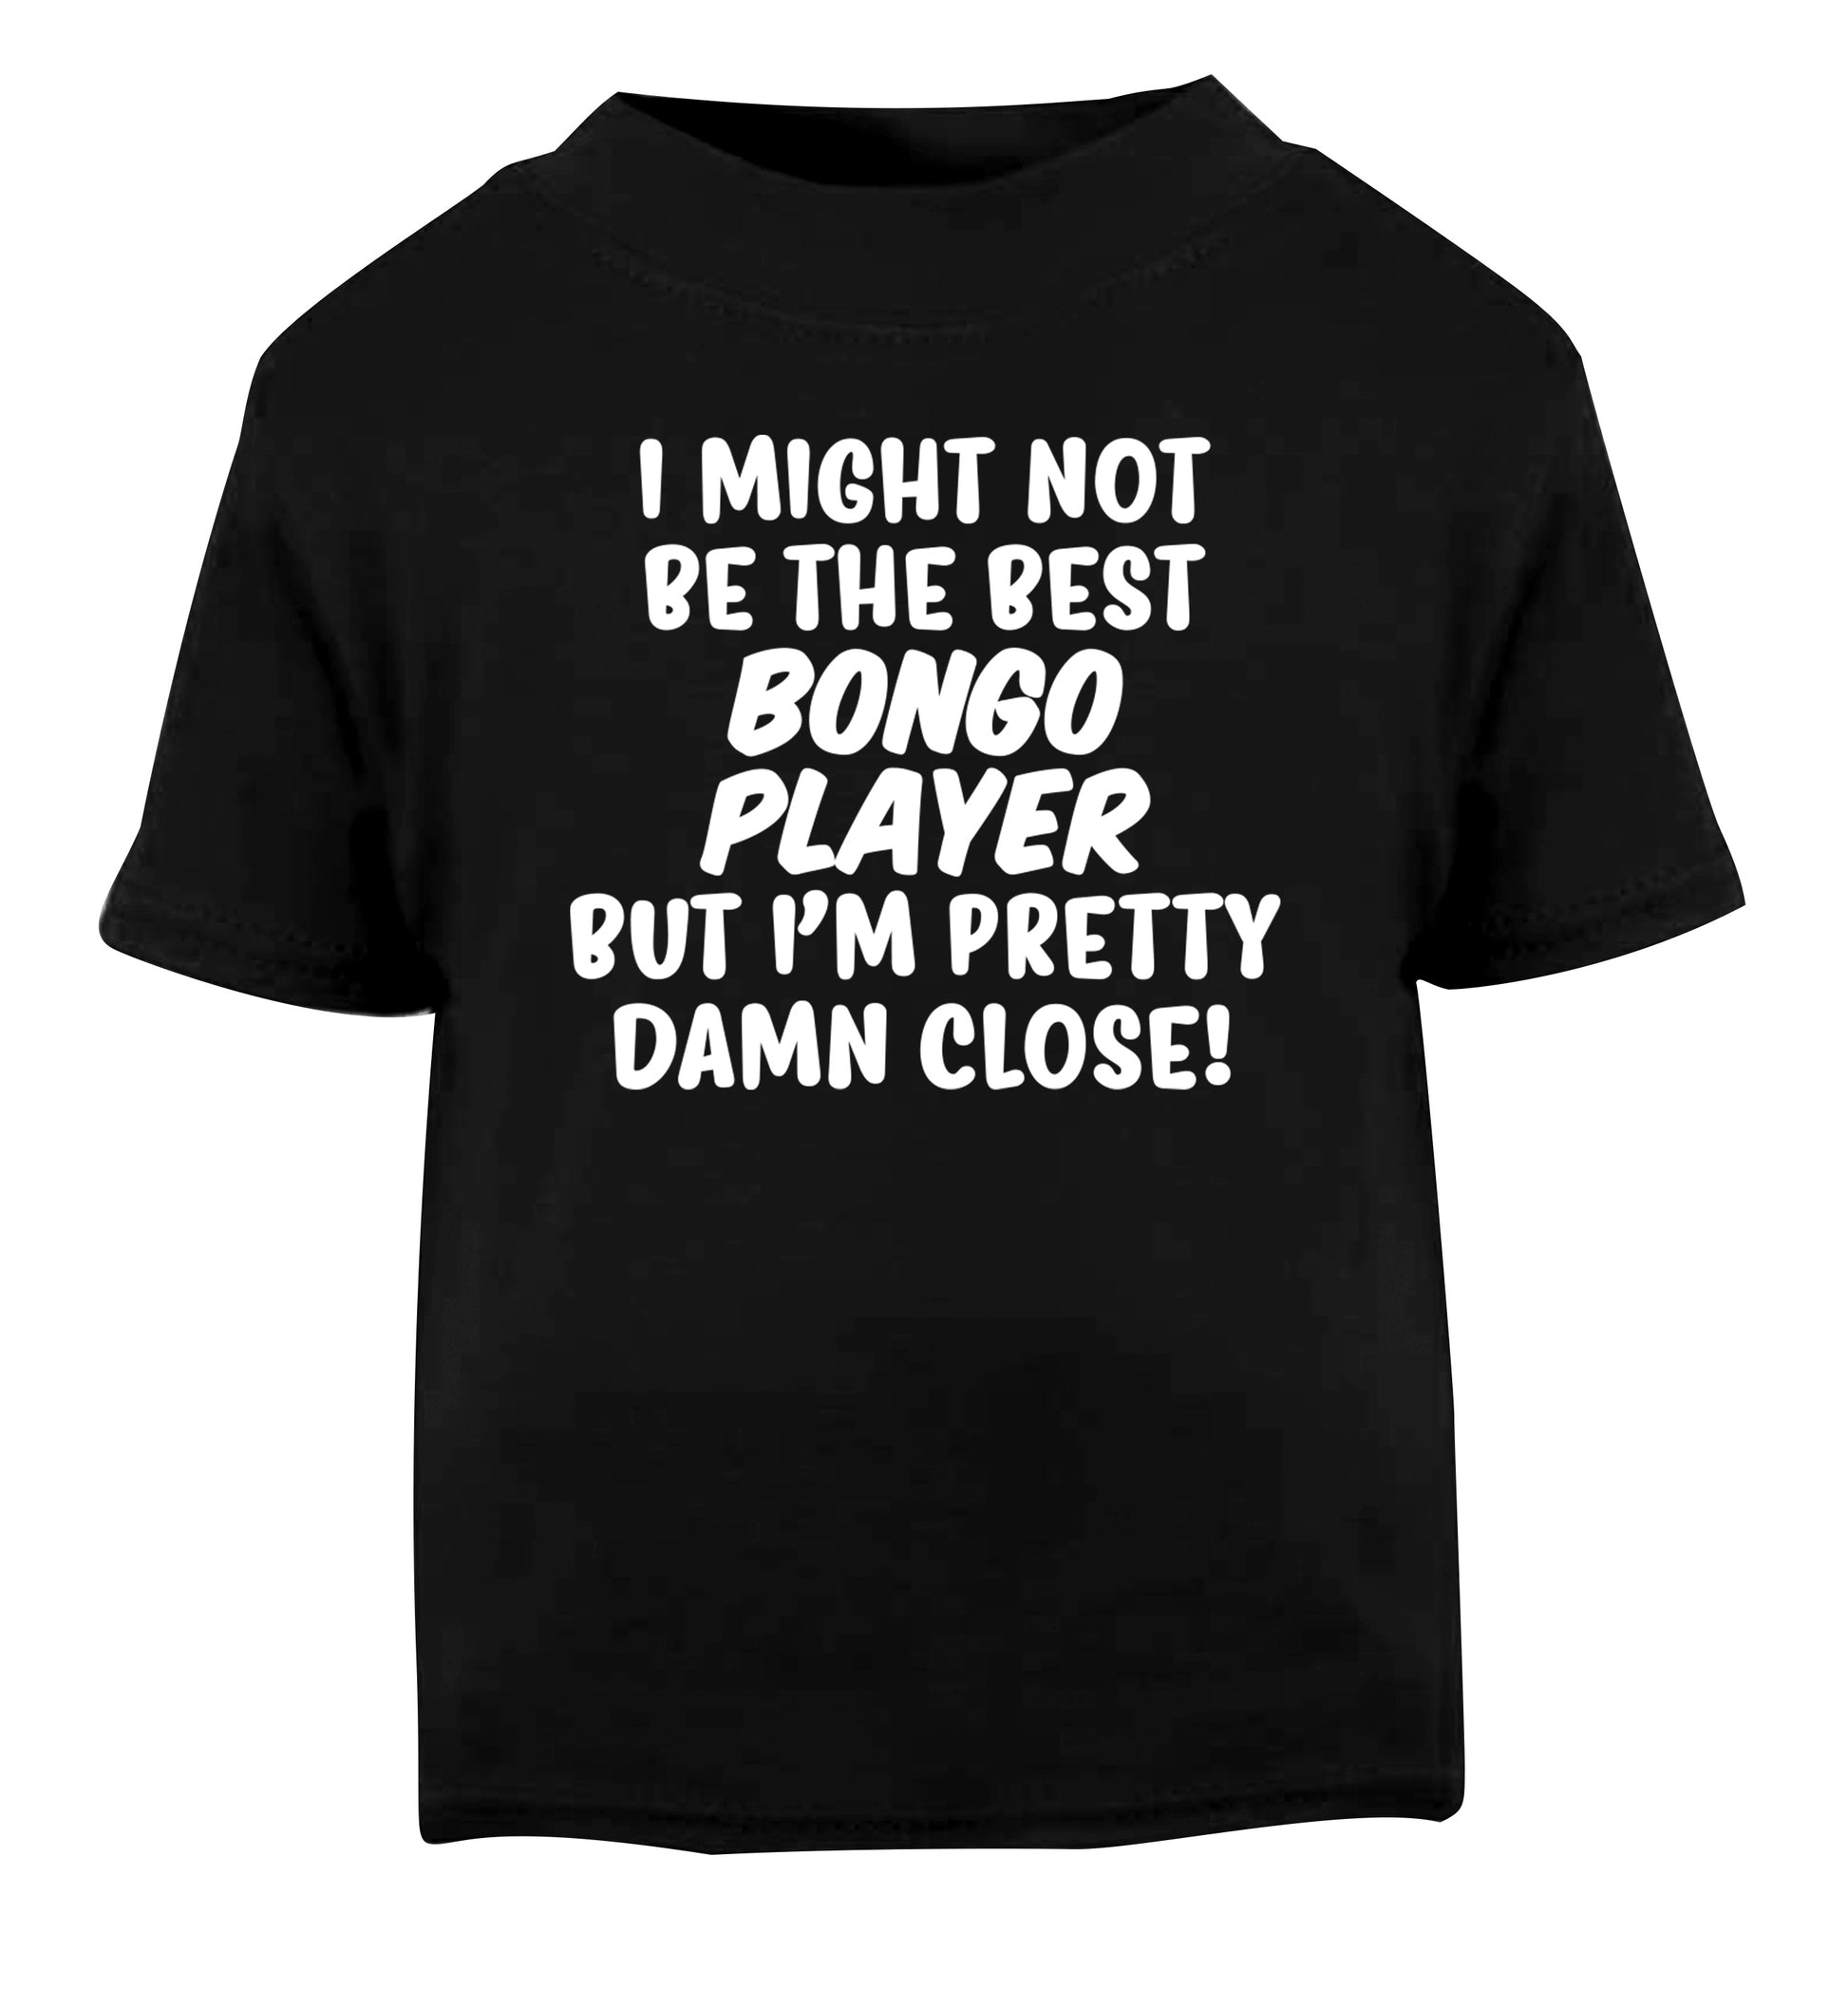 I might not be the best bongo player but I'm pretty close! Black Baby Toddler Tshirt 2 years